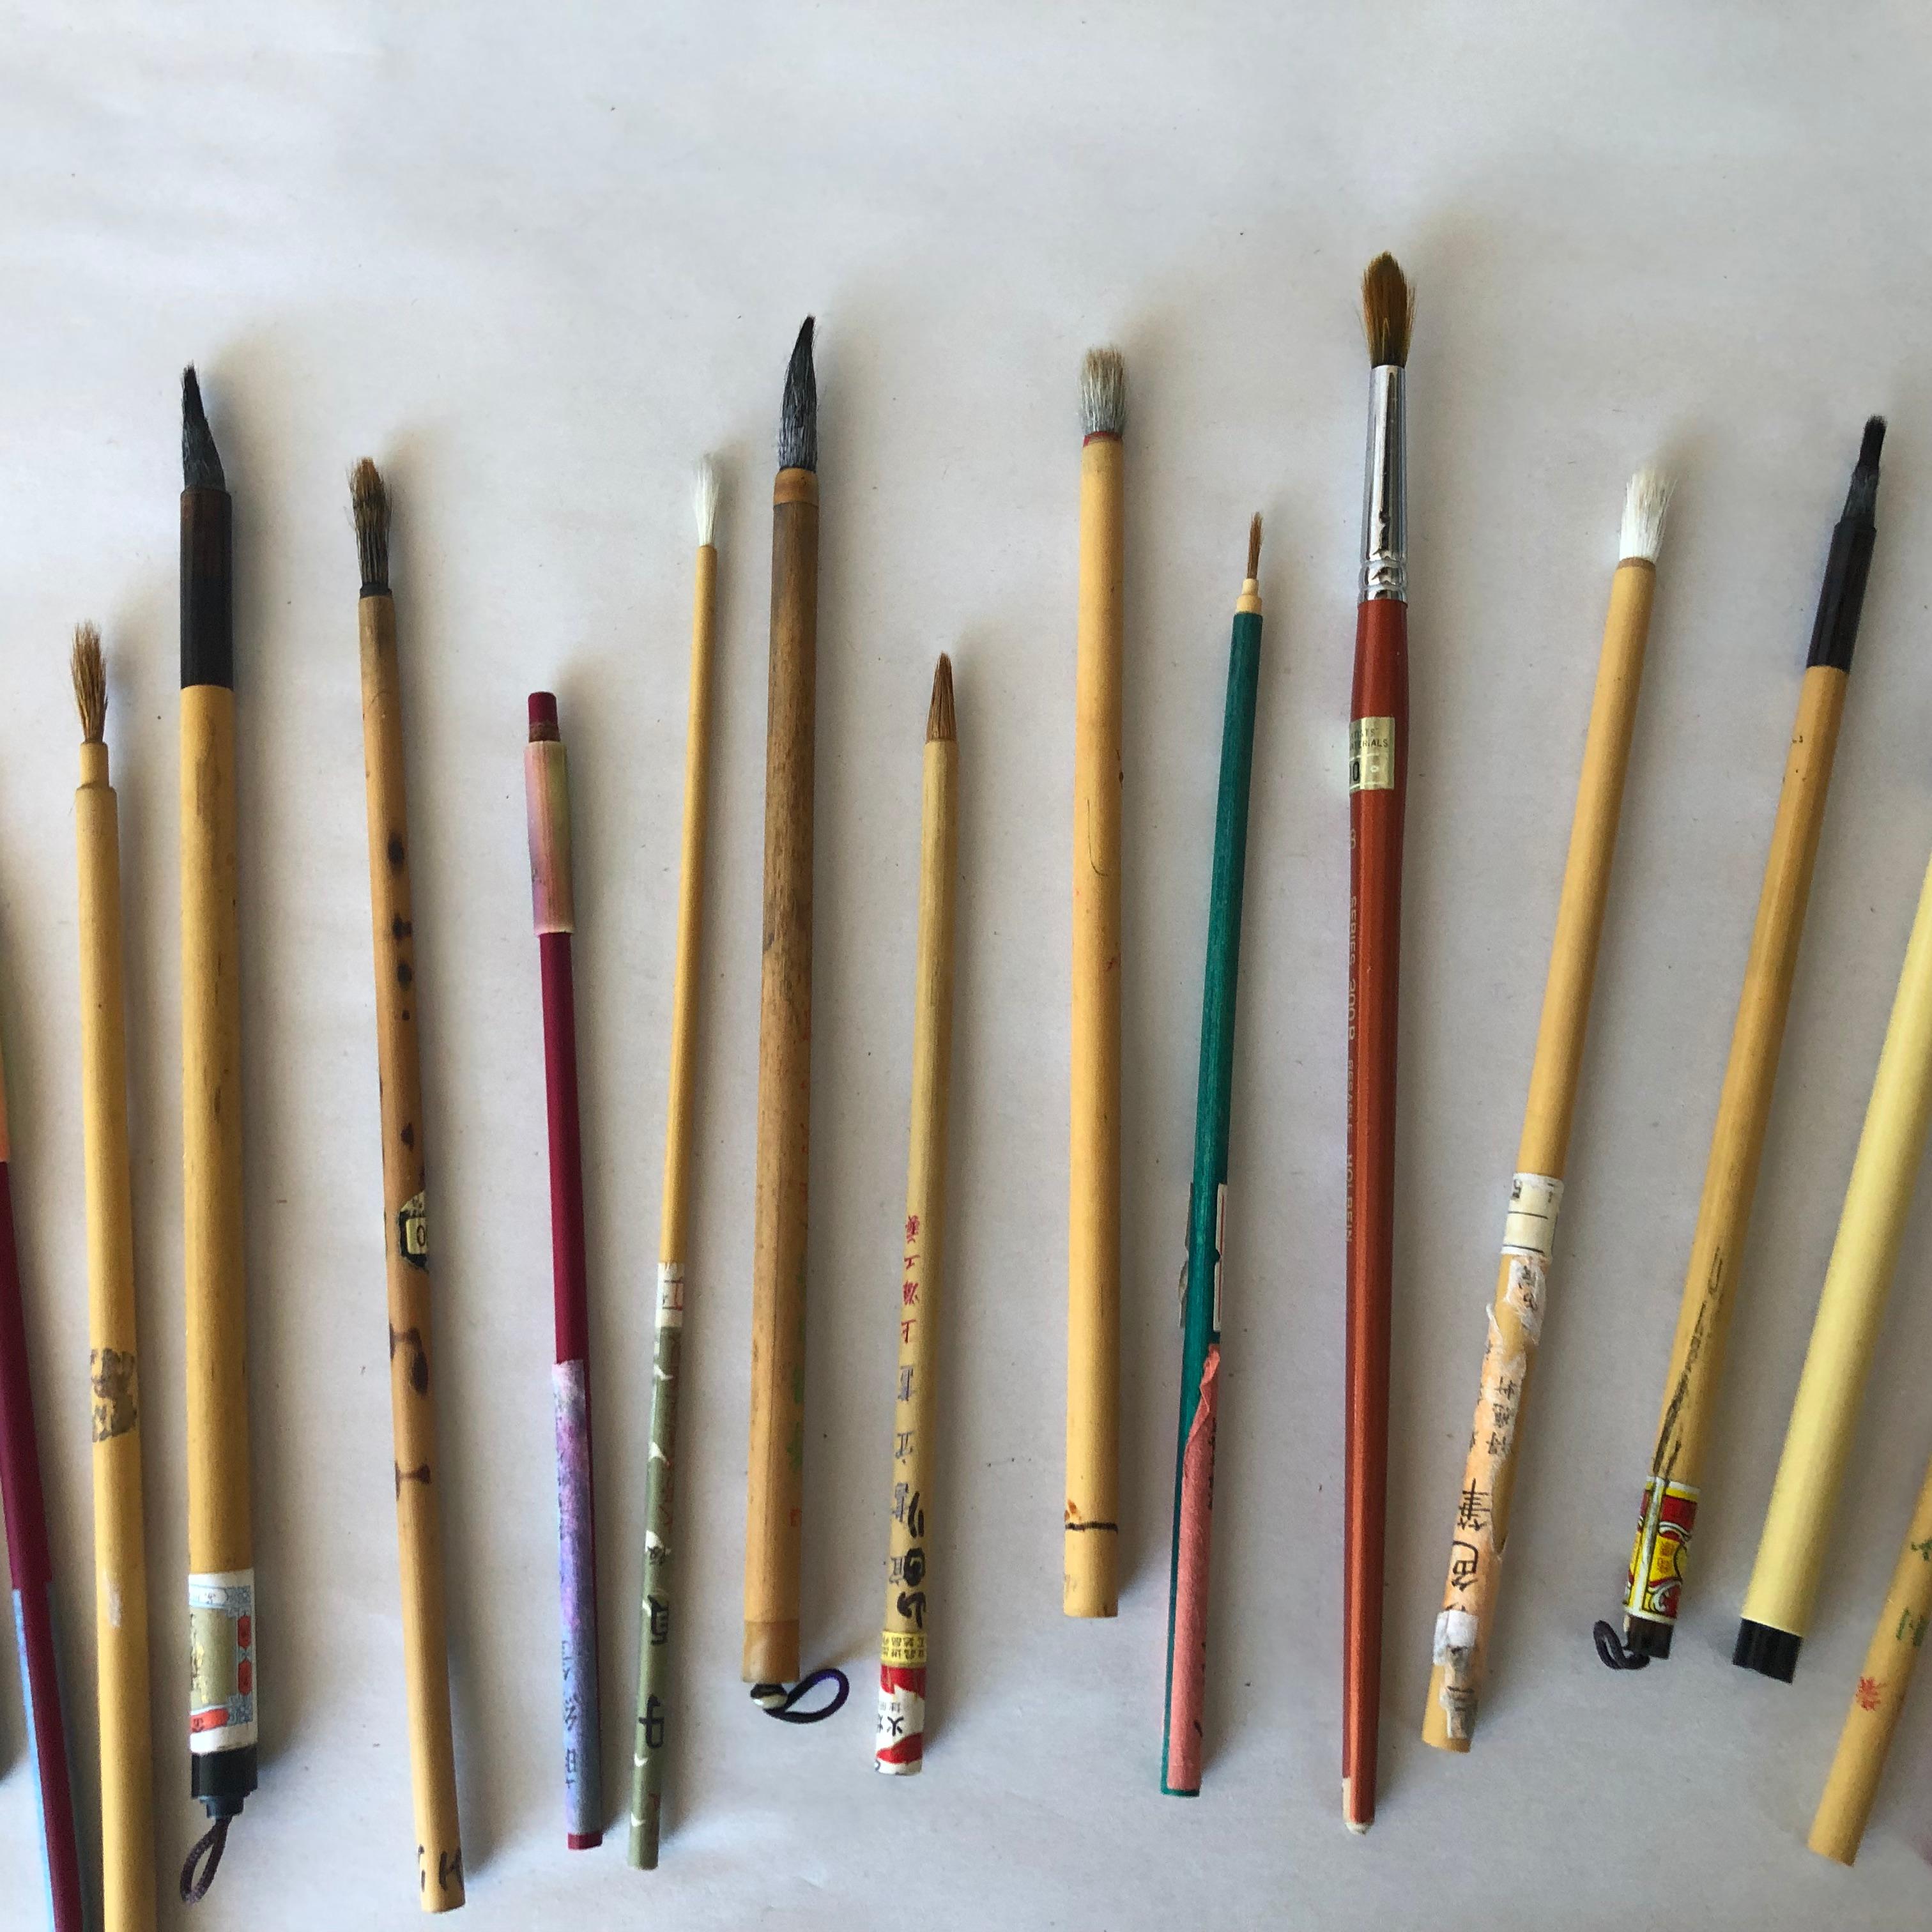 Showa Artisan's Cache of 20 Old Chinese Paint Calligraphy Bamboo Brushes